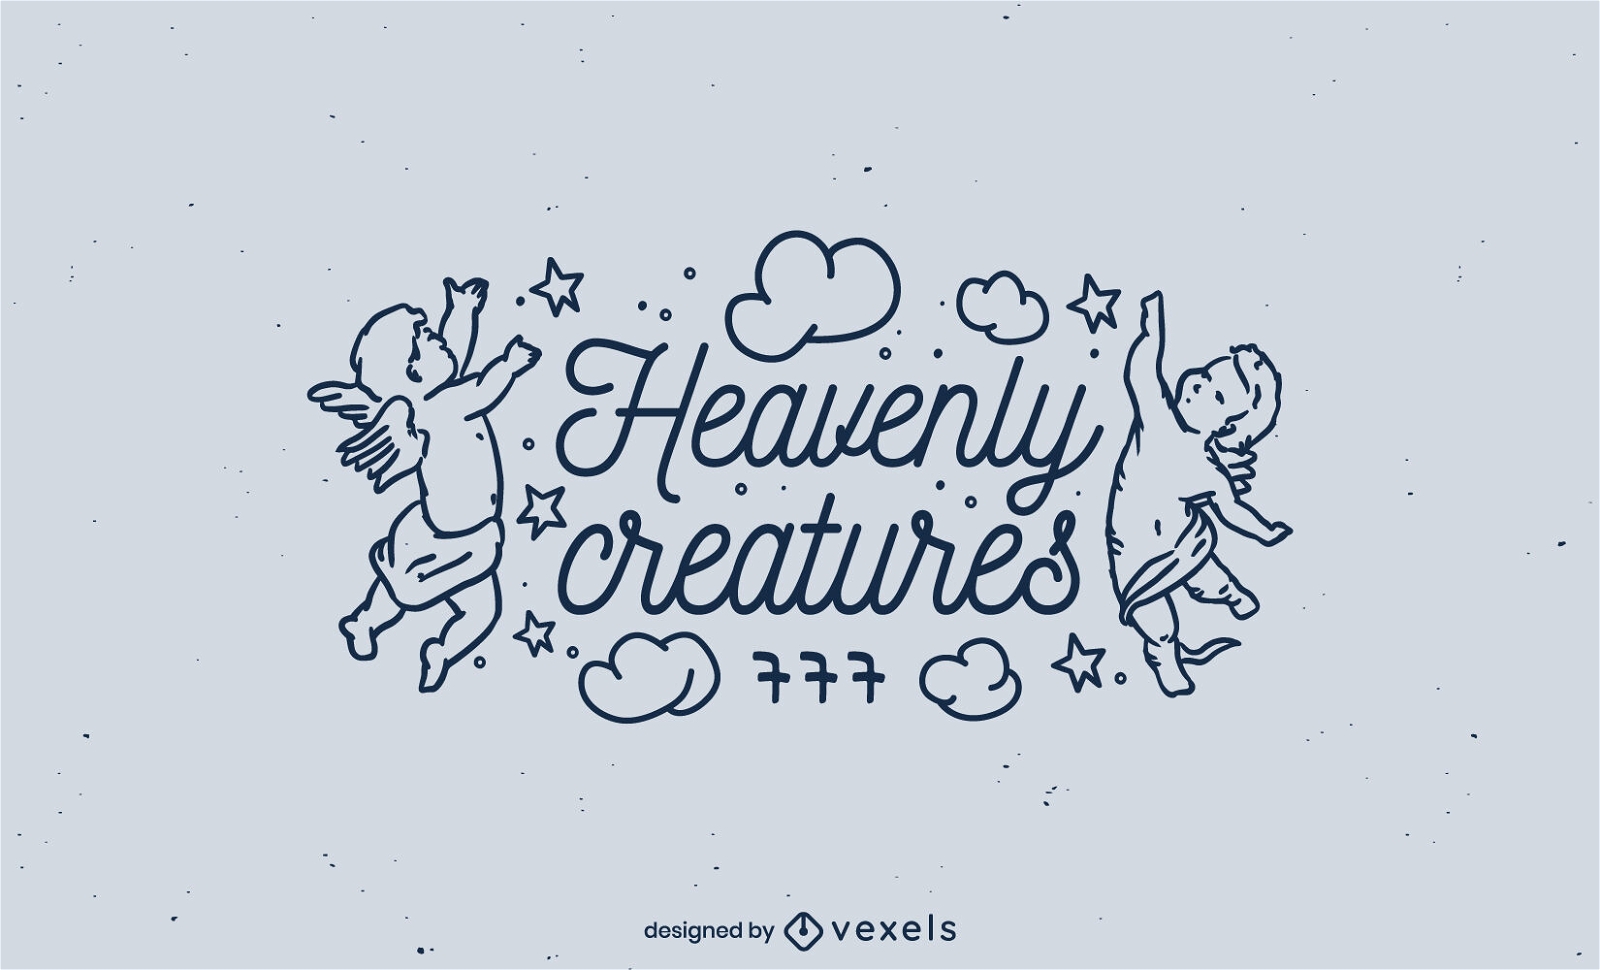 Baby angels flying in the sky logo design